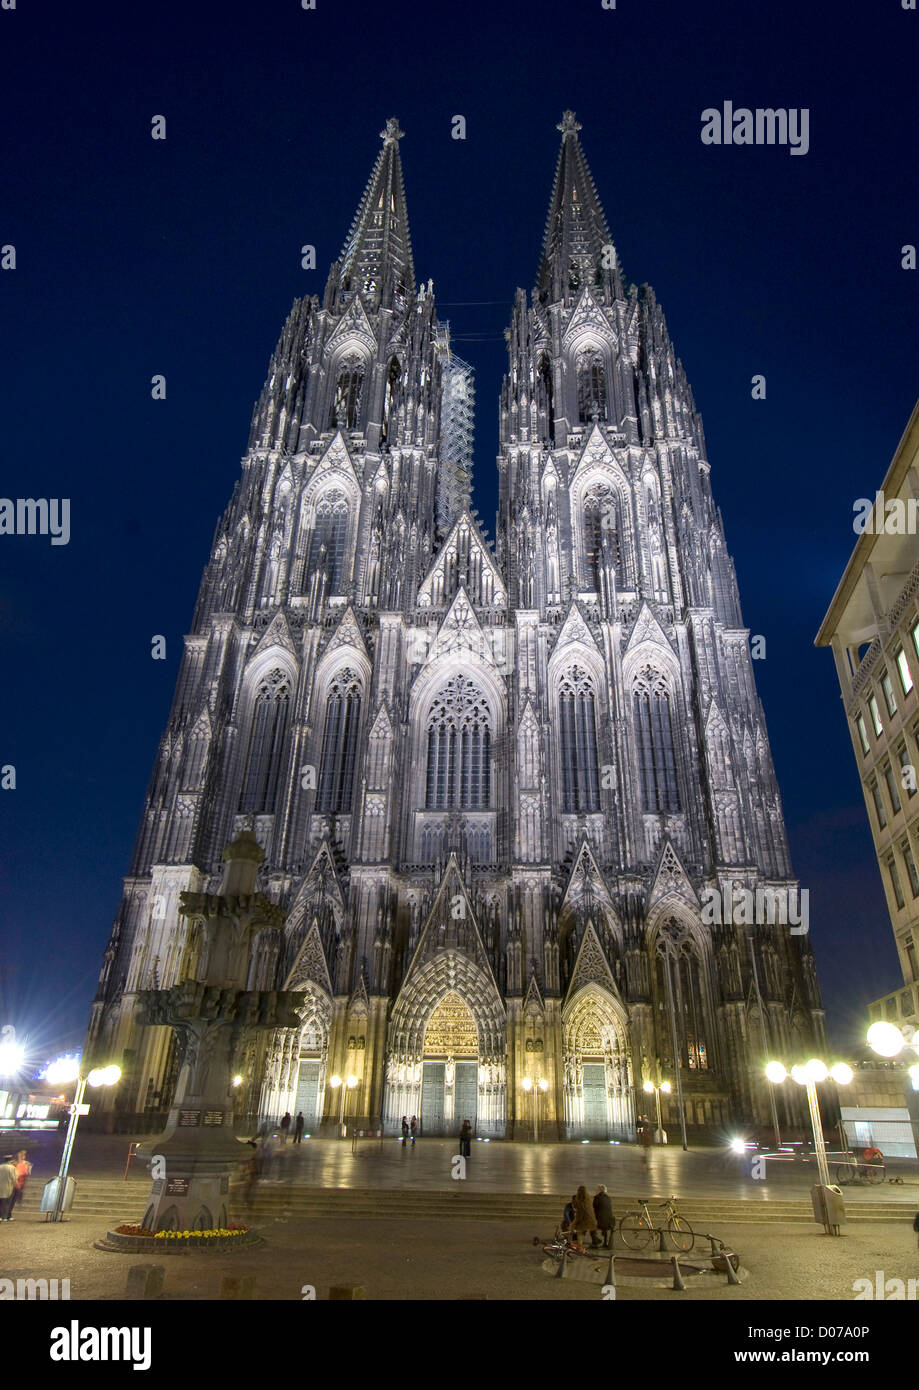 The Dom church of Cologne in Germany Stock Photo